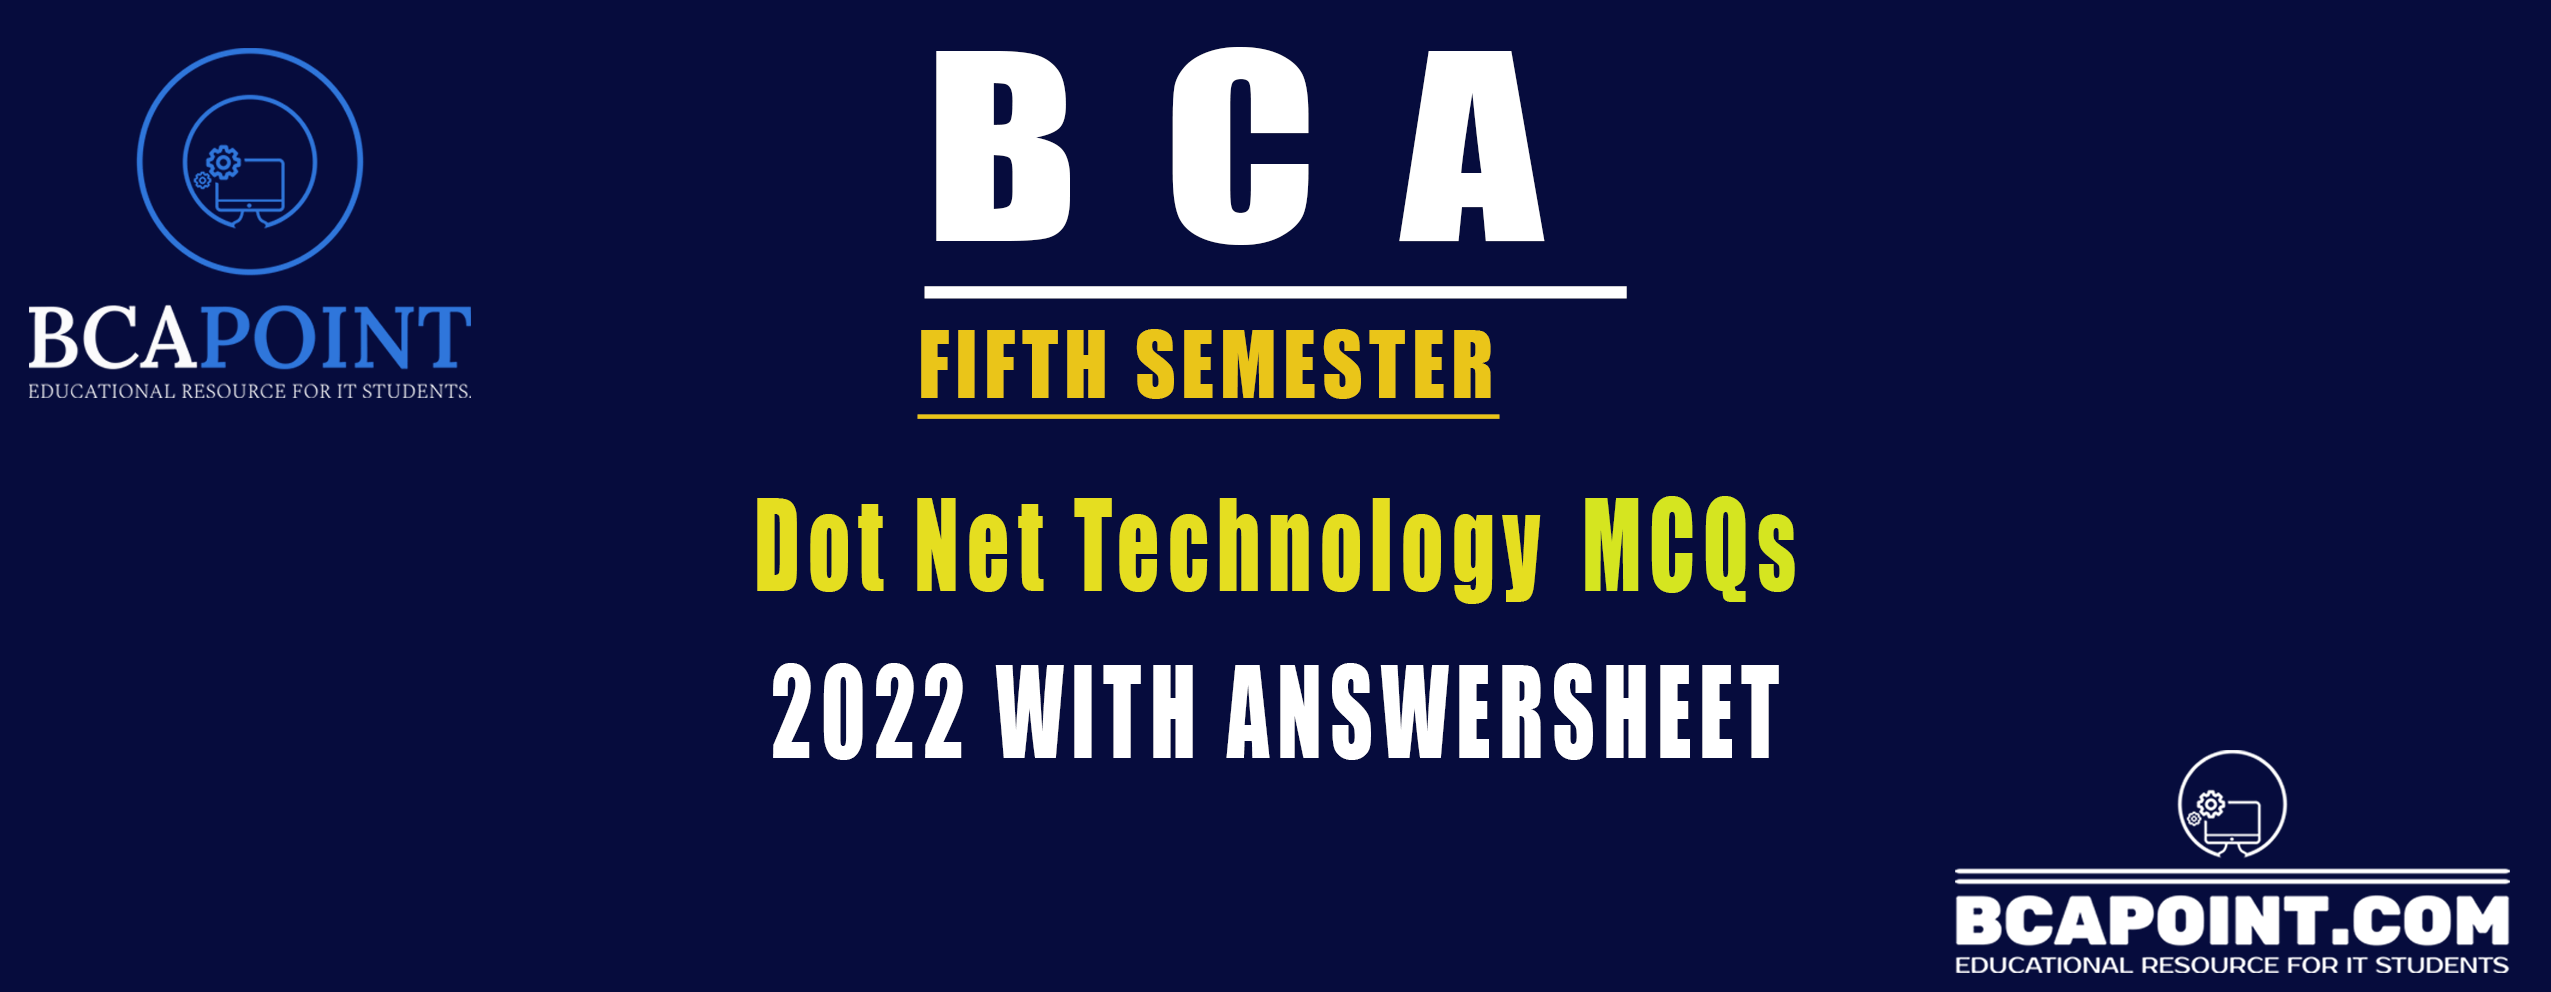 You are currently viewing BCA Fifth Semester DotNet Technology MCQs 2022 With Answer sheet